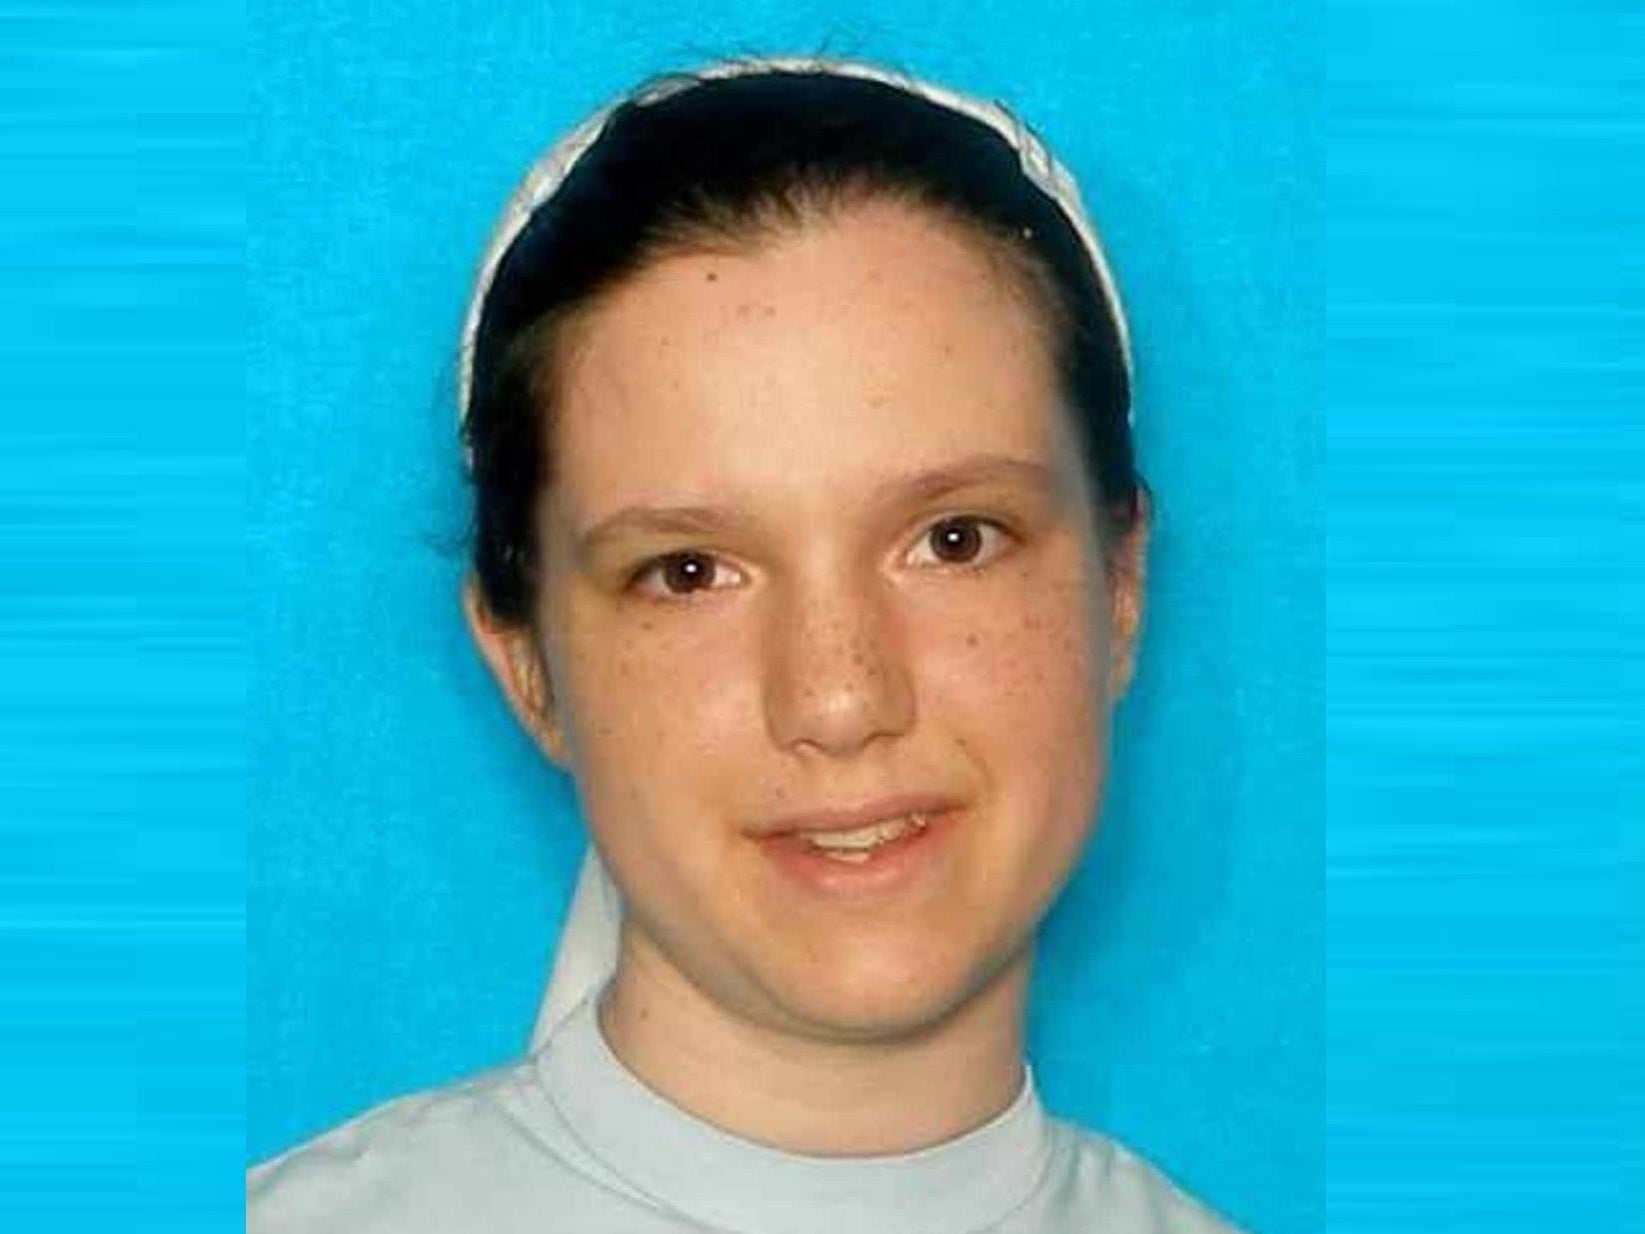 Police launch a criminal investigation after the body of Sasha Marie Krause is discovered 200 miles from her New Mexico home